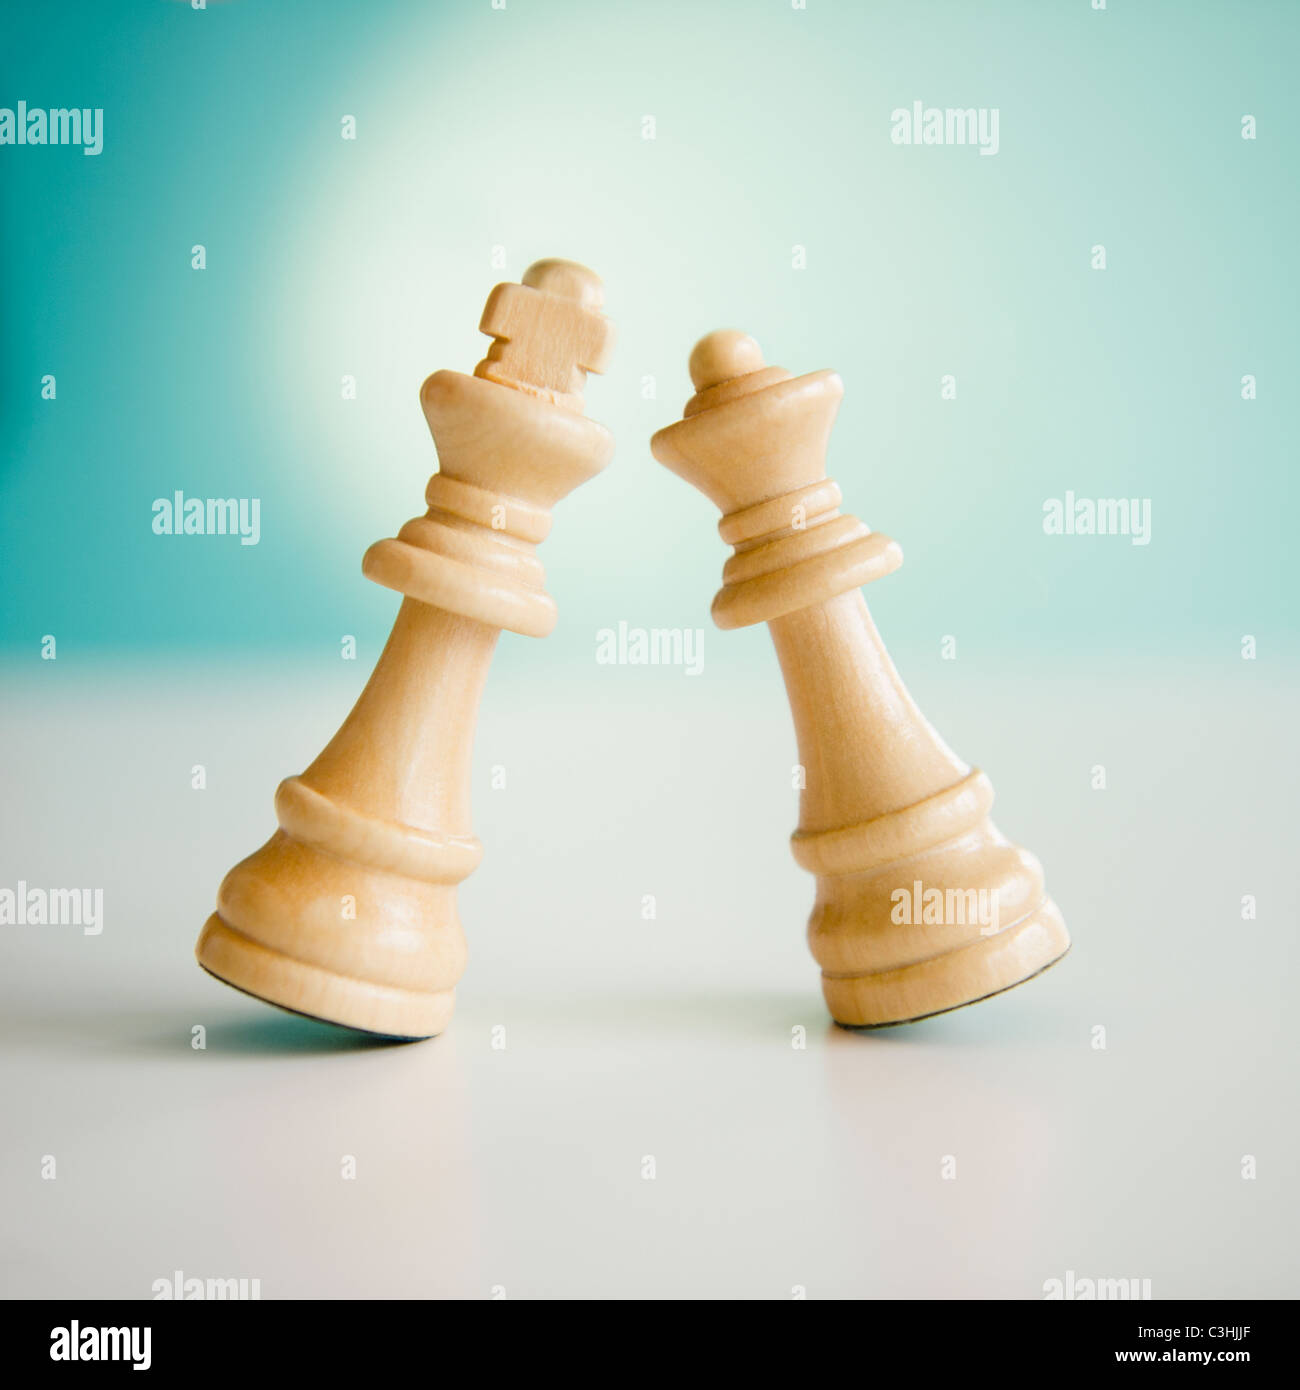 Studio shot of king and queen chess pieces Stock Photo